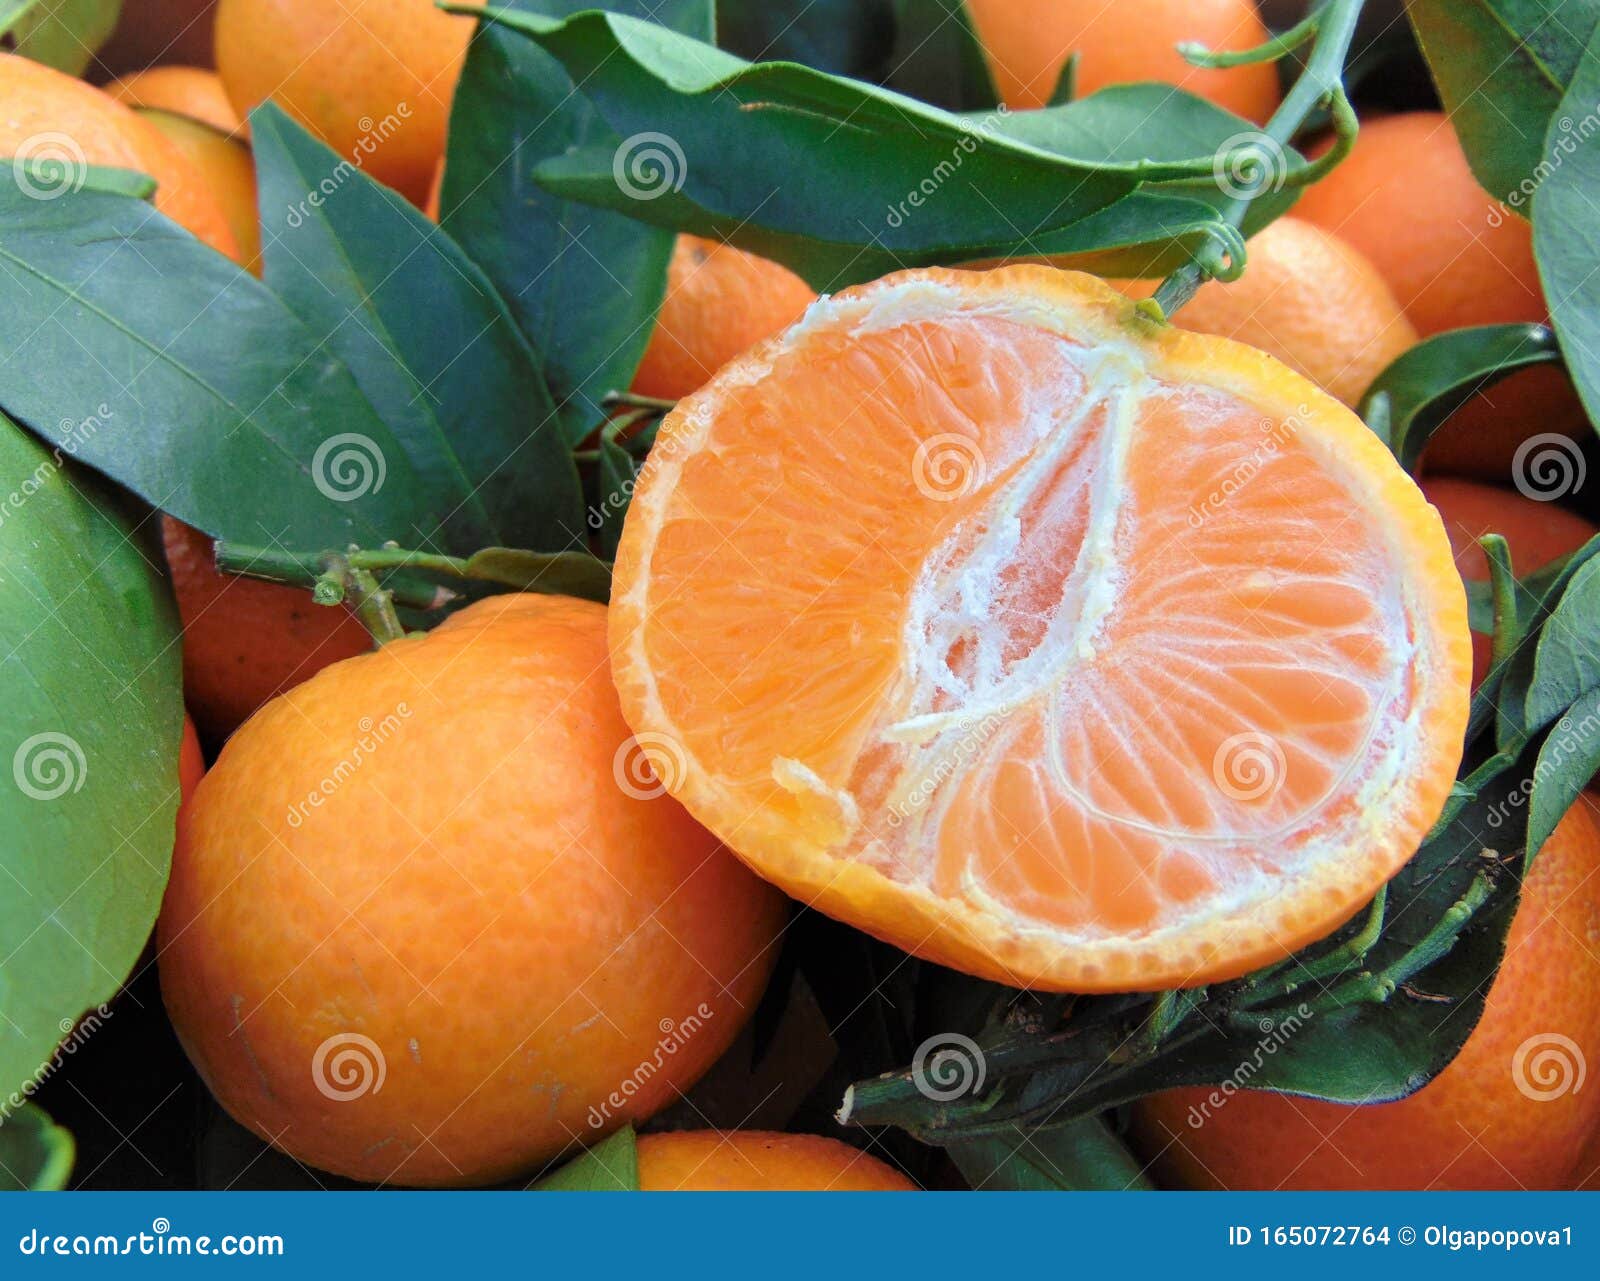 Online orders and shipping fast Fresh ripe mandarin oranges (clementine,  tangerine) with green leaves on retail market display, close up, high angle  view Stock Photo - Alamy, mandarin oranges fresh